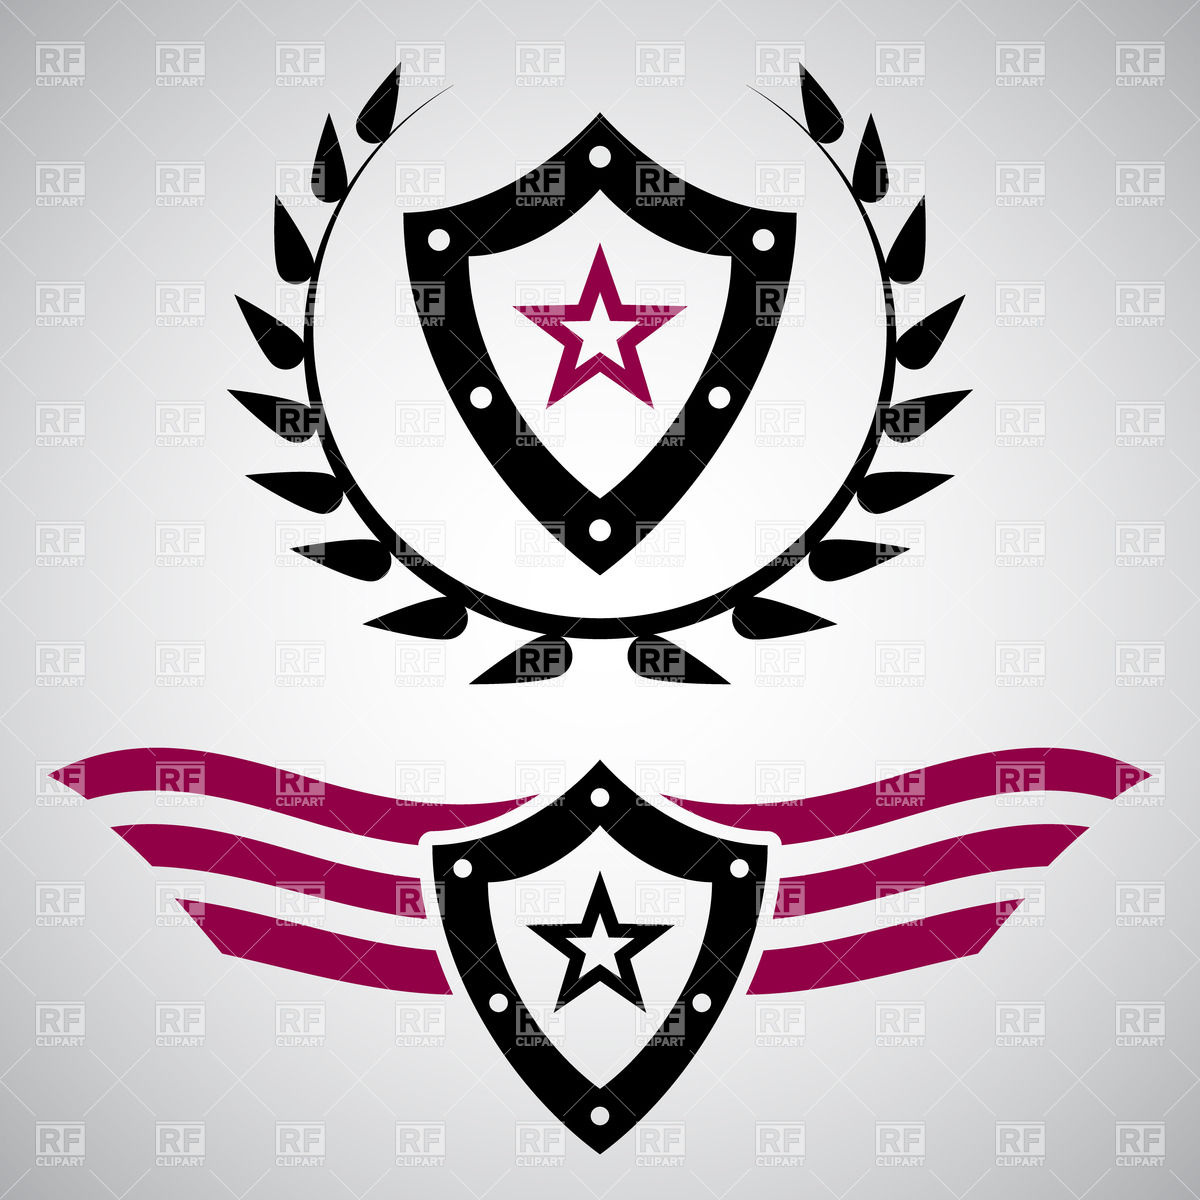 Military Style Emblems With Shields 28386 Download Royalty Free